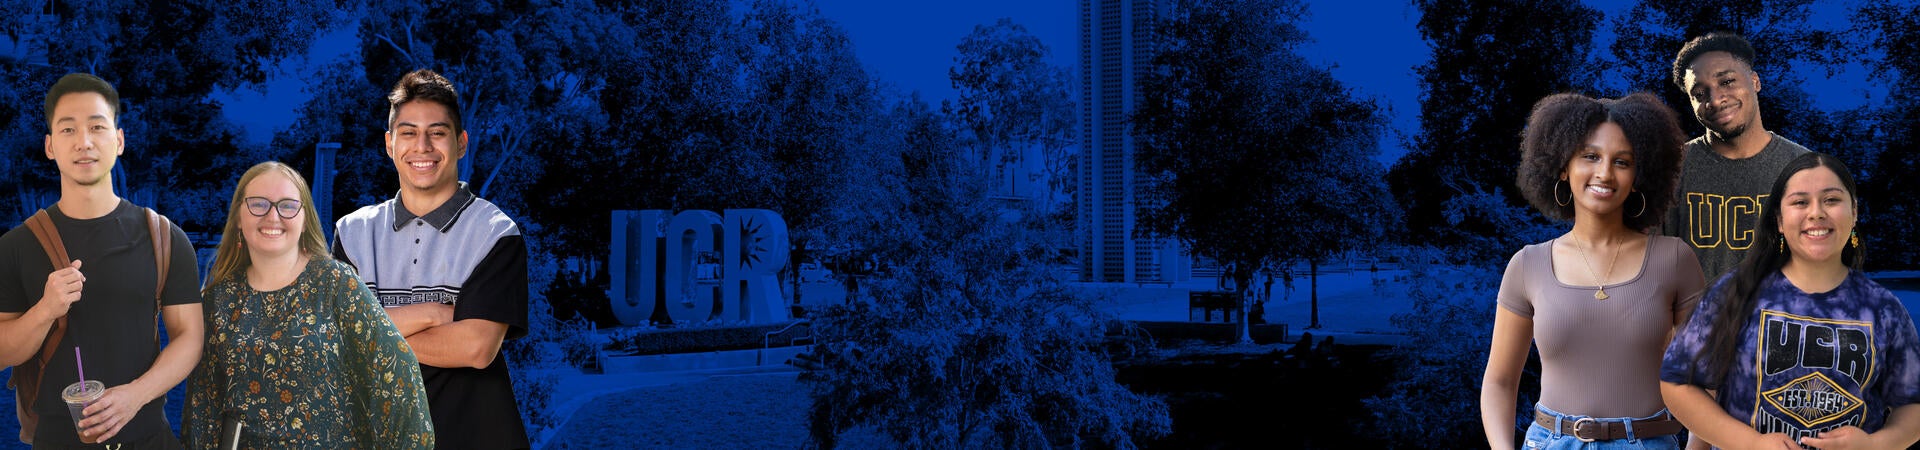 Six UCR students appear in two clusters - the background is a view of the campus but has a blue transparency over it. The first cluster of students on the left has a female student flanked by two males, while the cluster on the right has a male student flanked by two female students.